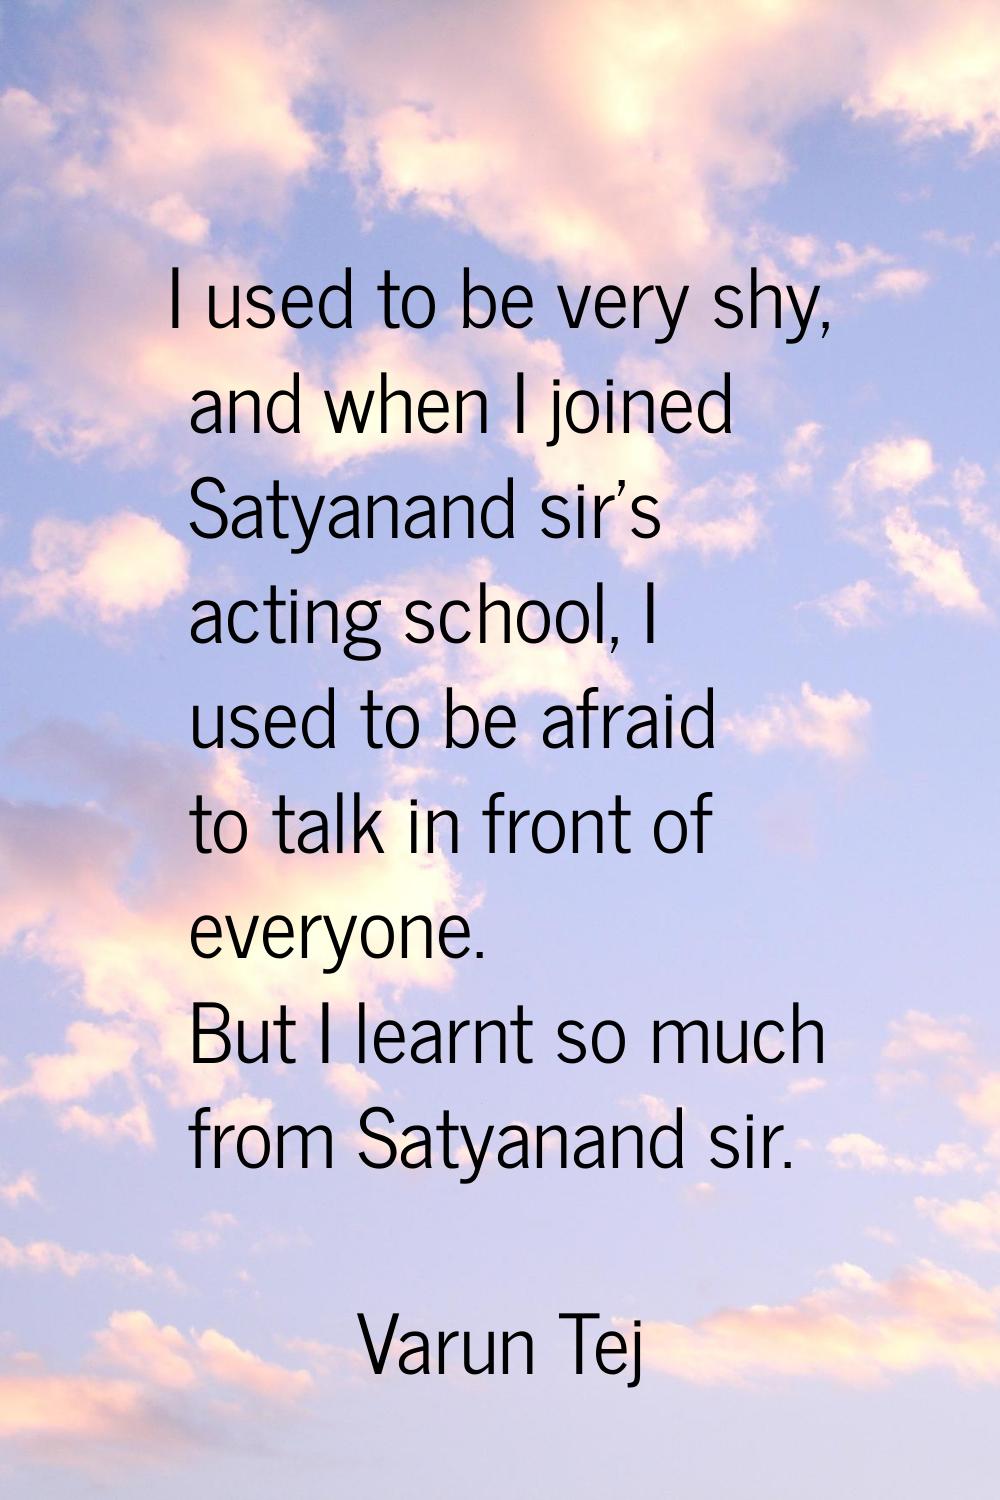 I used to be very shy, and when I joined Satyanand sir's acting school, I used to be afraid to talk